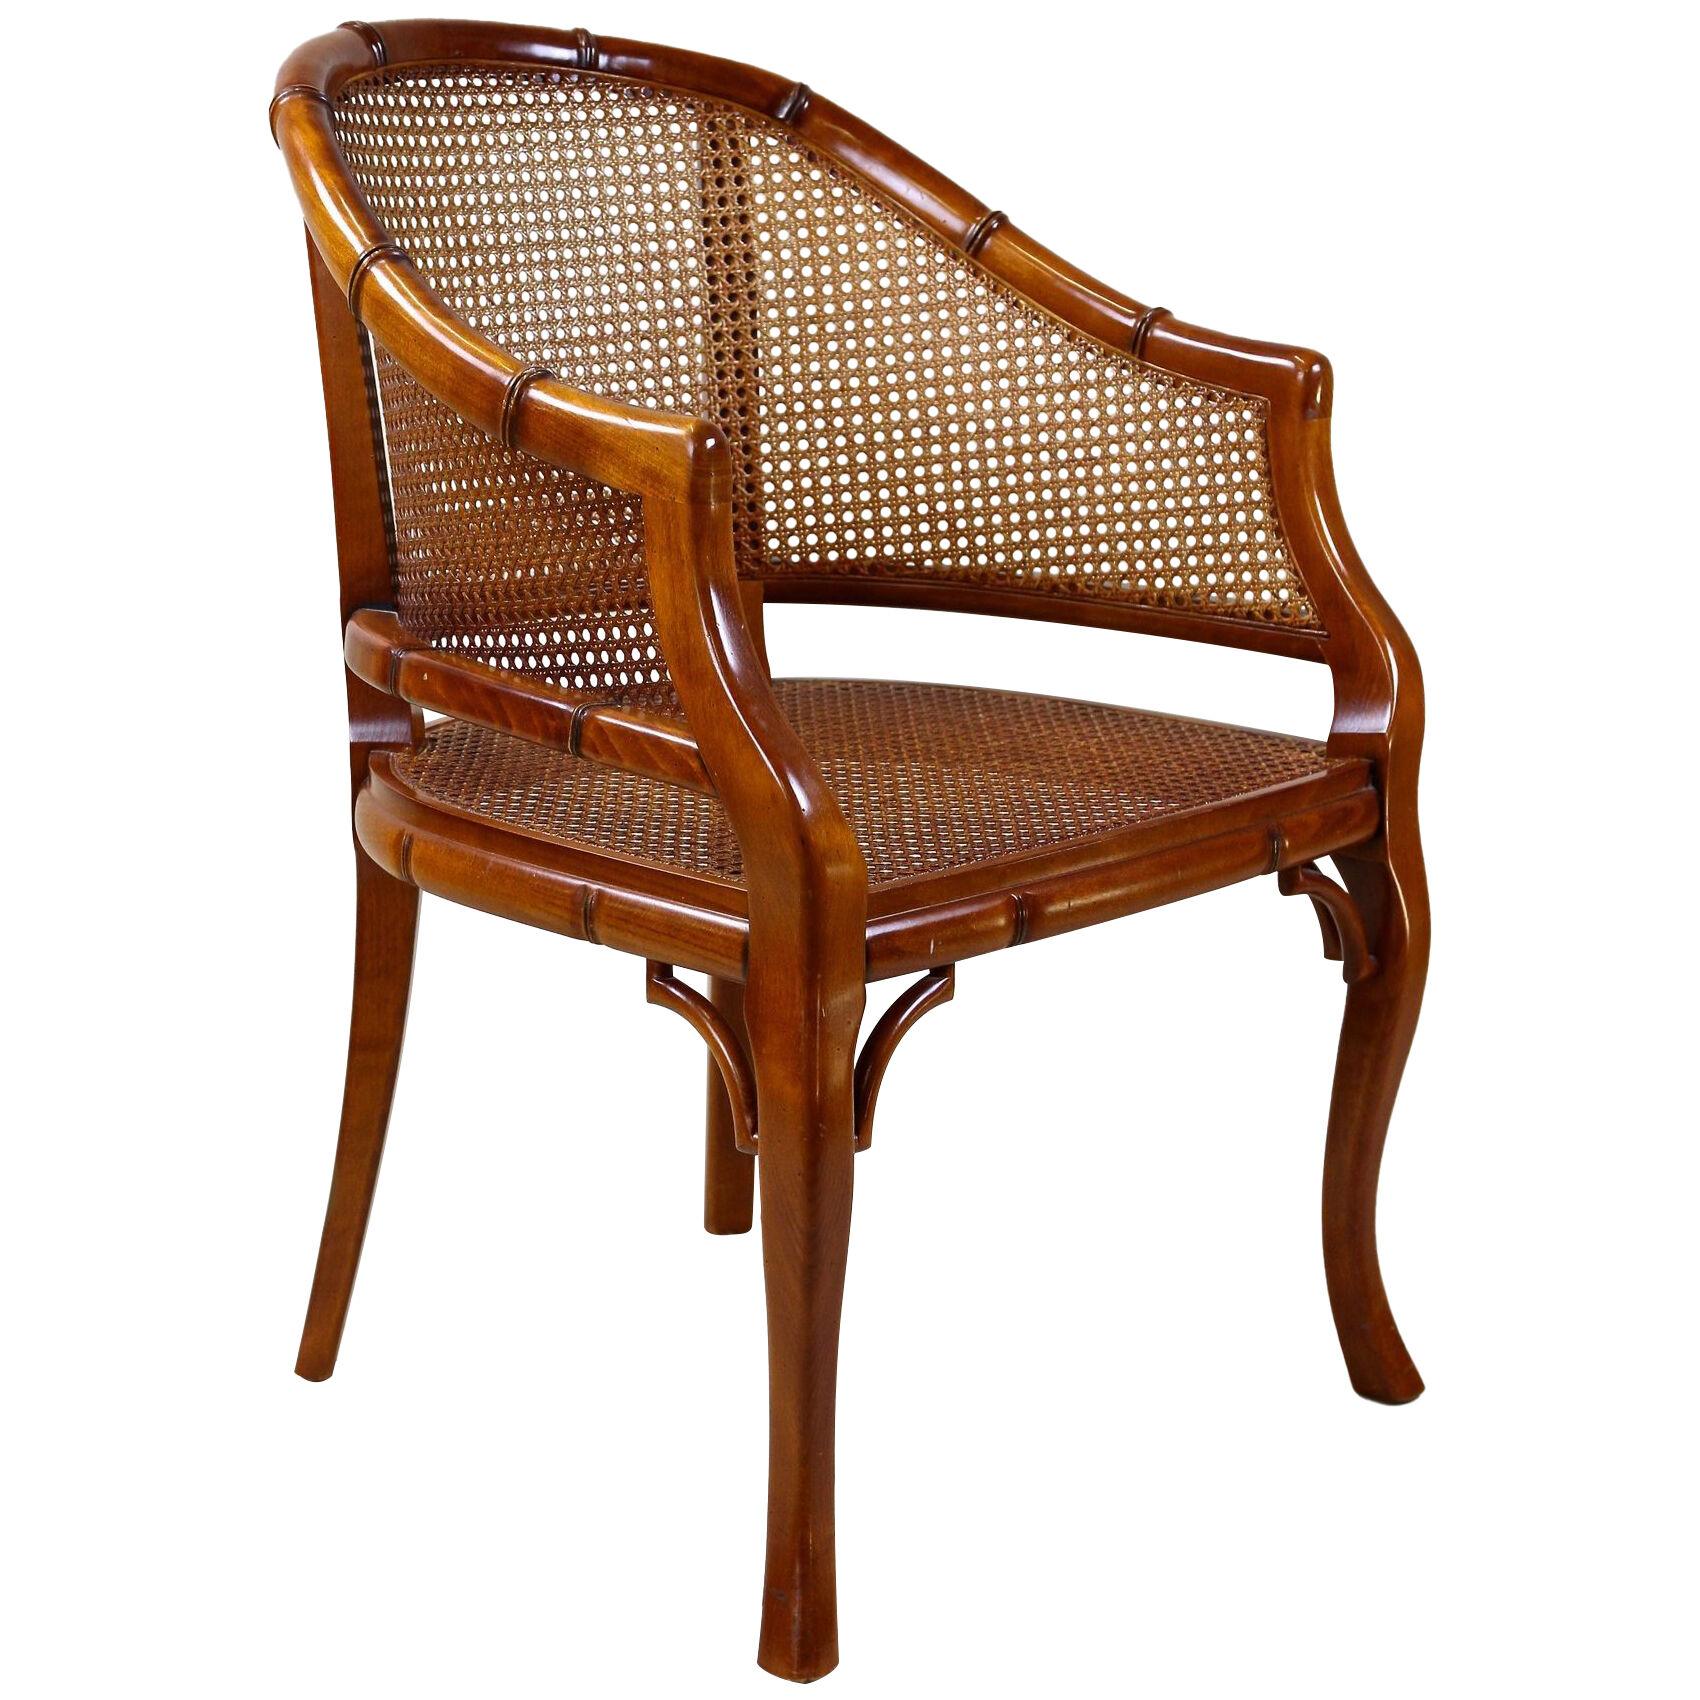 Mid-Century Faux-Bamboo Caned Barrel Armchair, Carved Nutwood, France ca. 1970